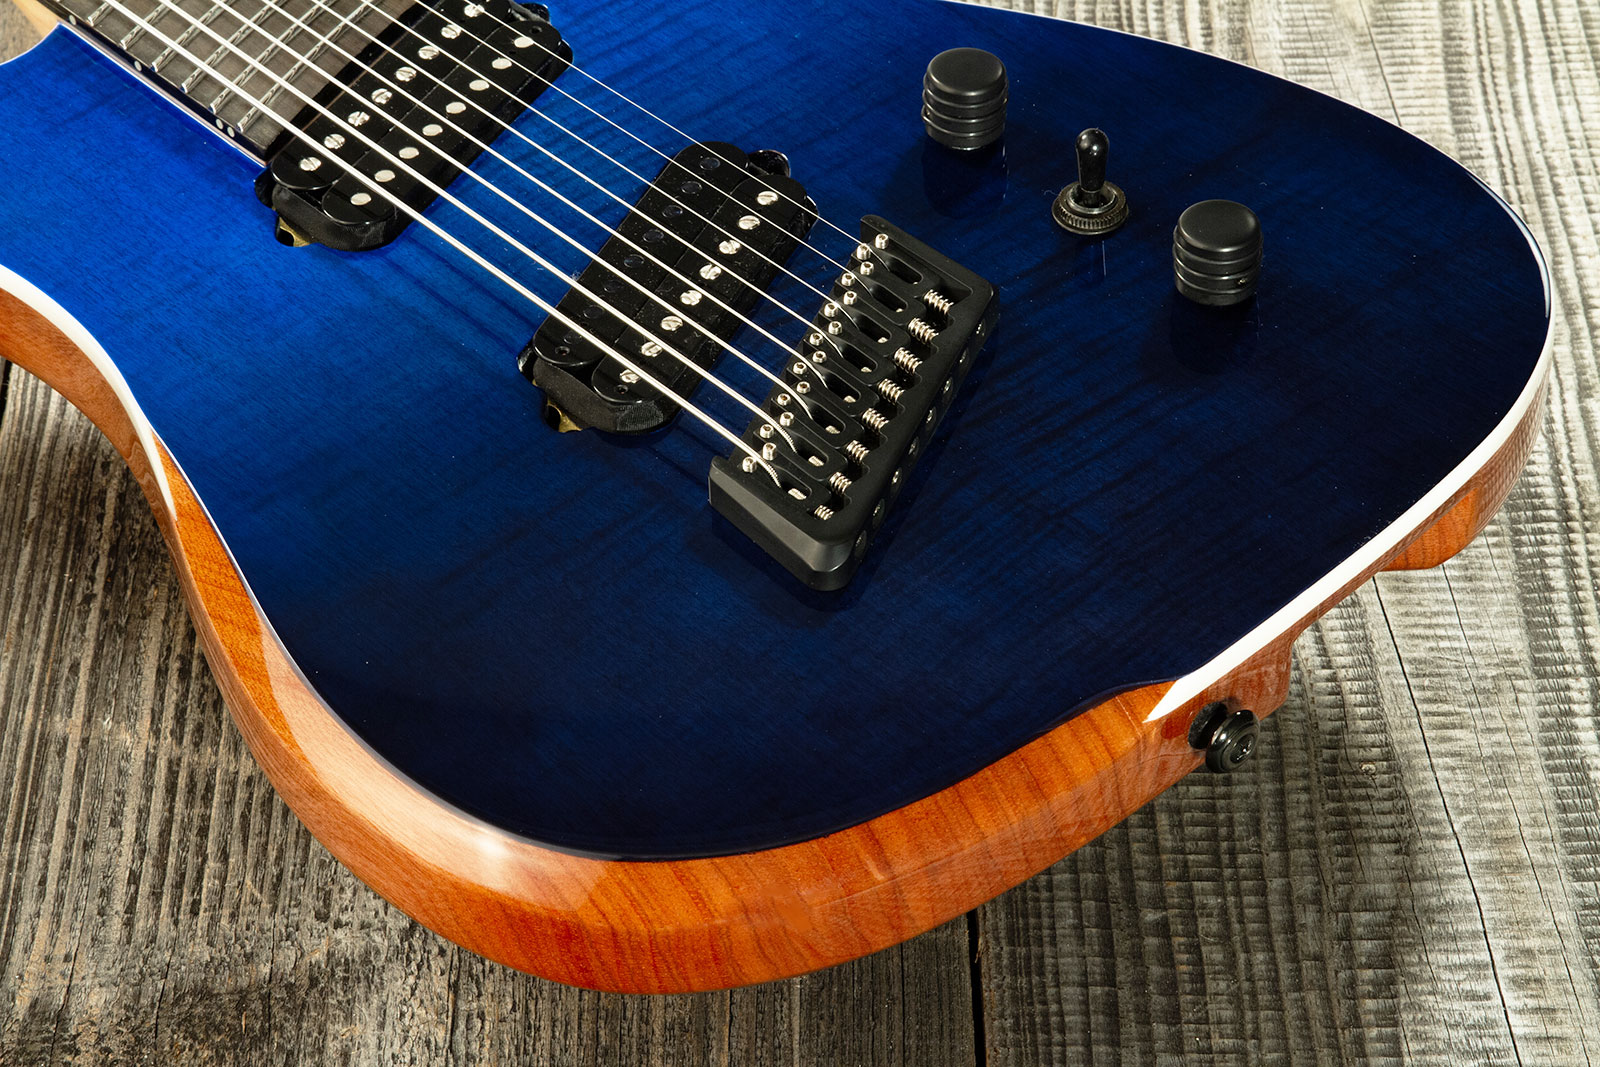 Ormsby Hype Gtr 8 Ltd Run 16 8c Multiscale 2h Ht Eb #gtr07665 - Sky Fall - 8 and 9 string electric guitar - Variation 4